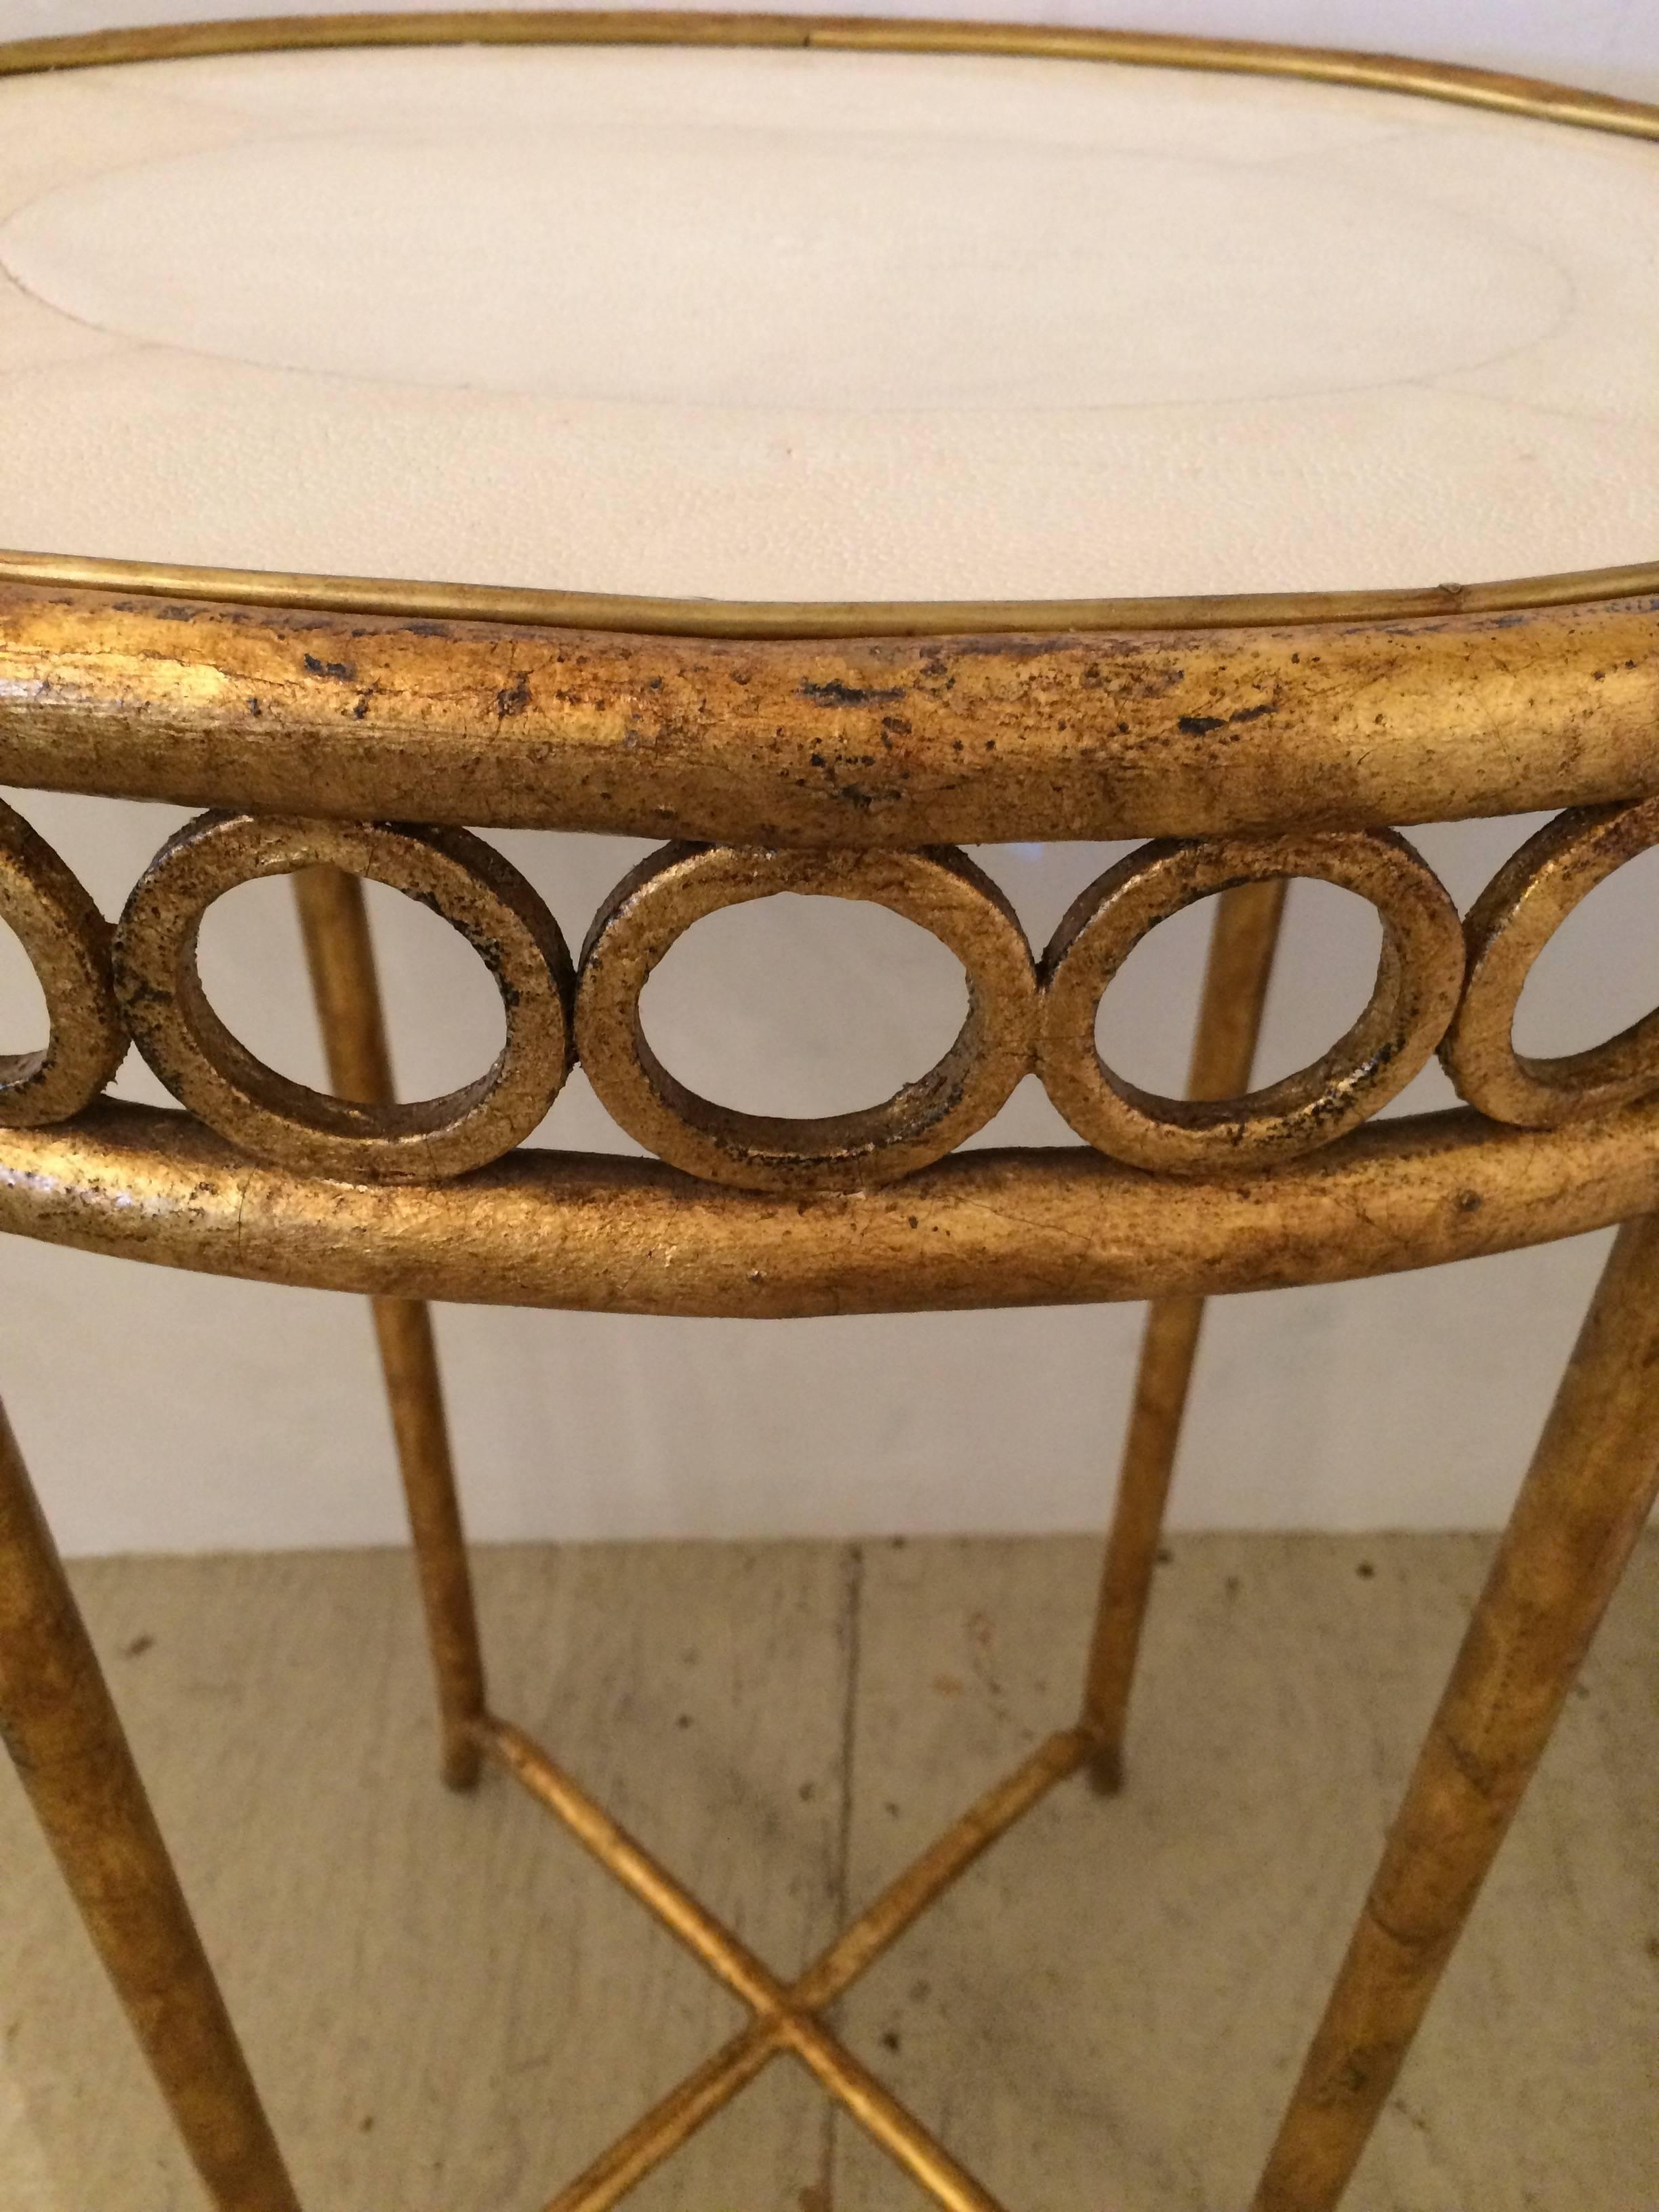 Glamorous oval side or end table having a gilt iron base with circle motif and faux shagreen cream colored top.